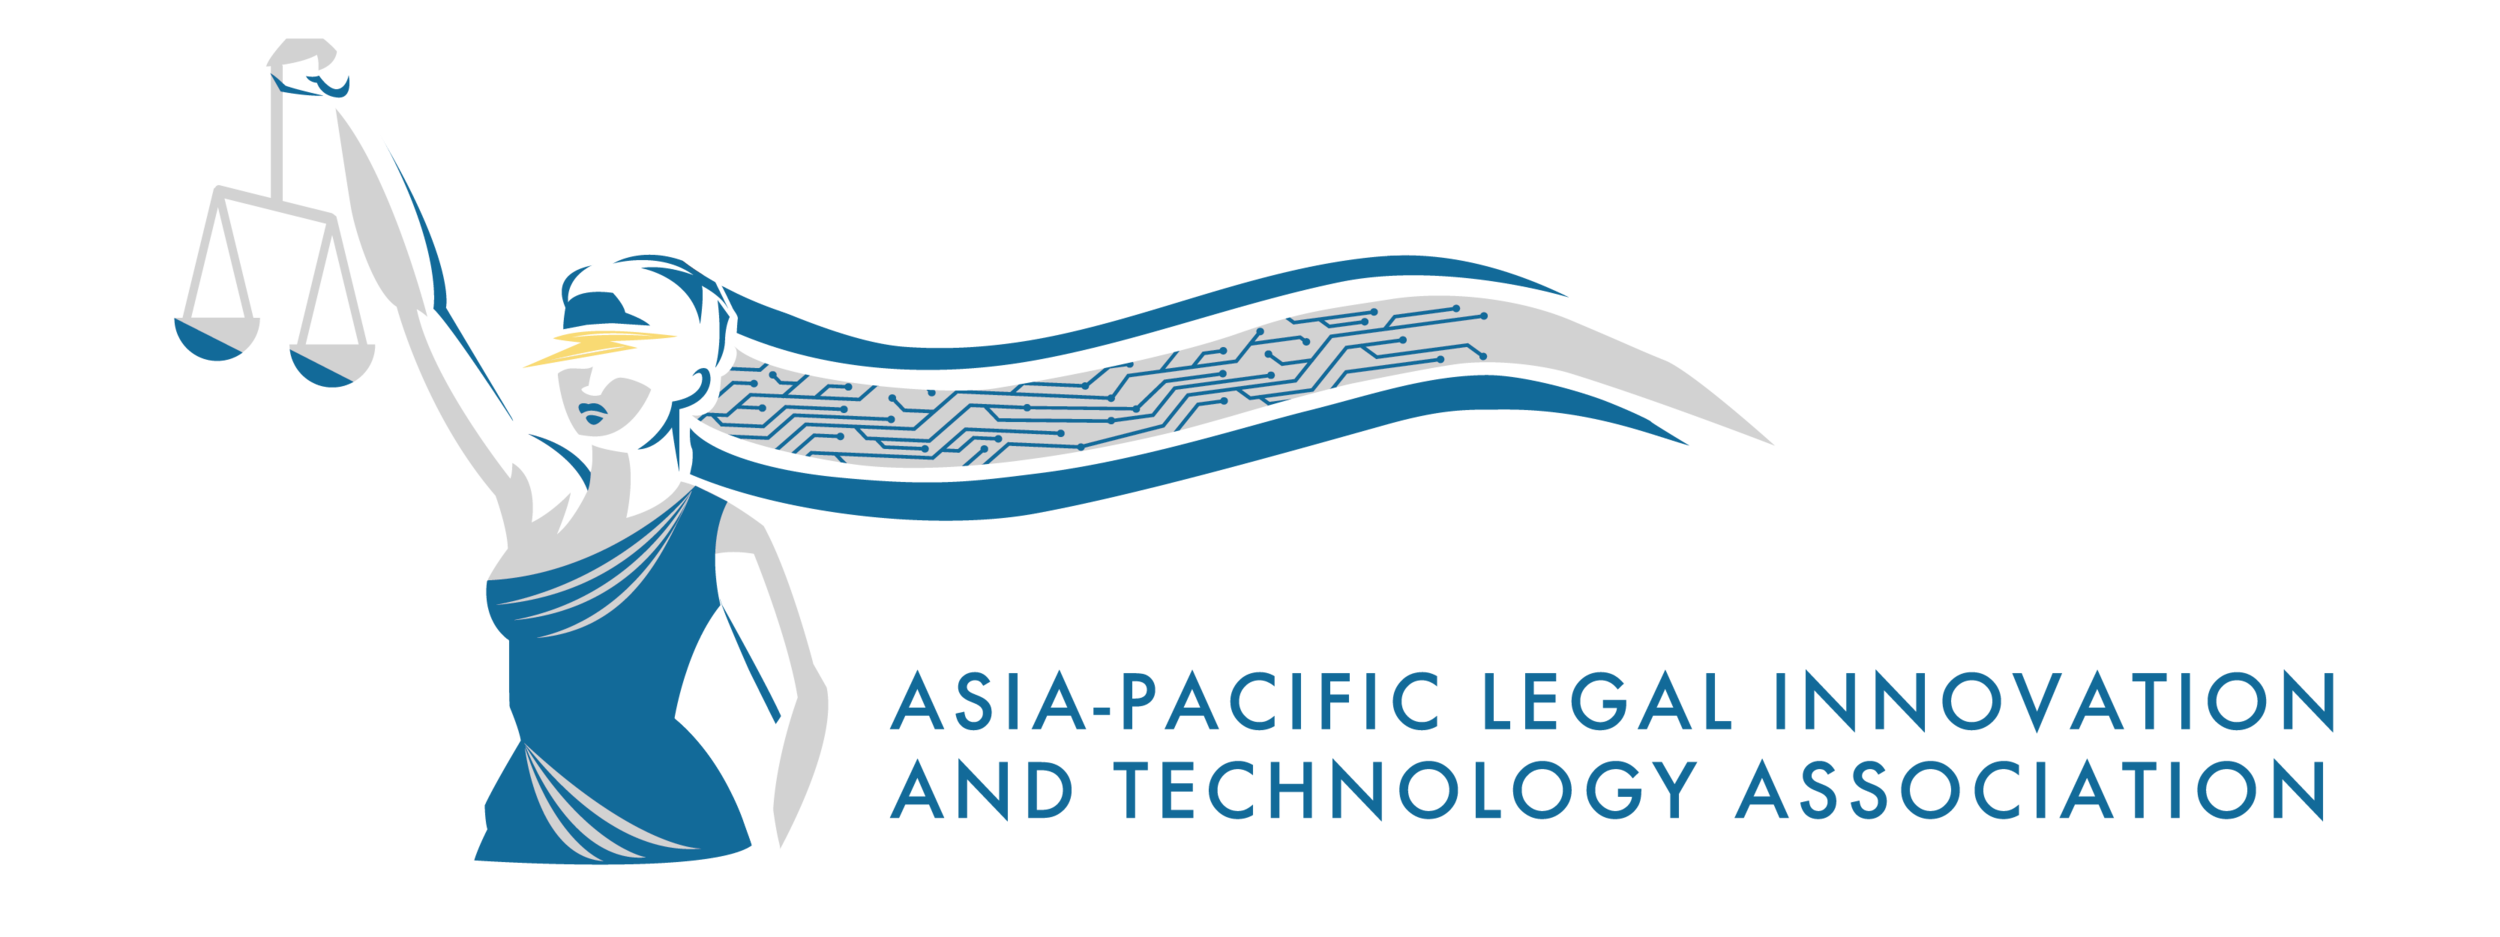 Asia-Pacific Legal Innovation and Technology Association